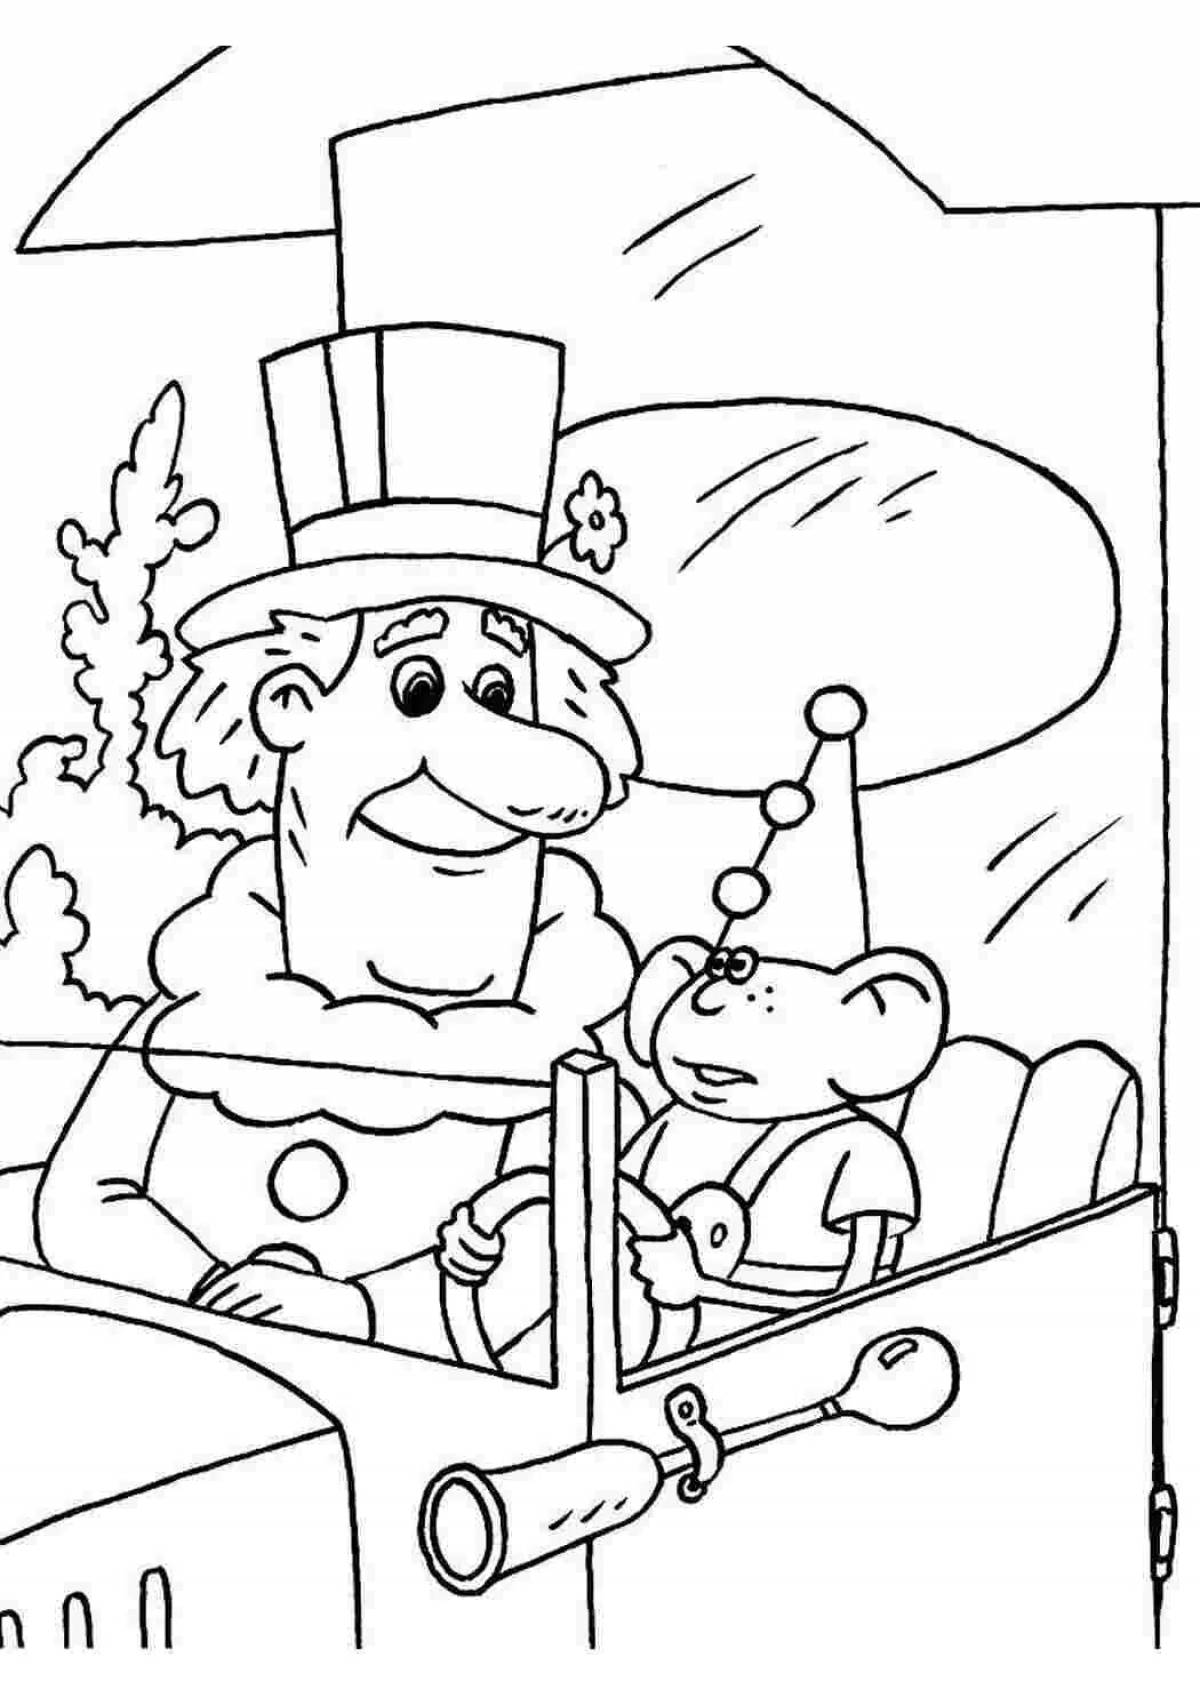 Adorable funky uncle mokus coloring book